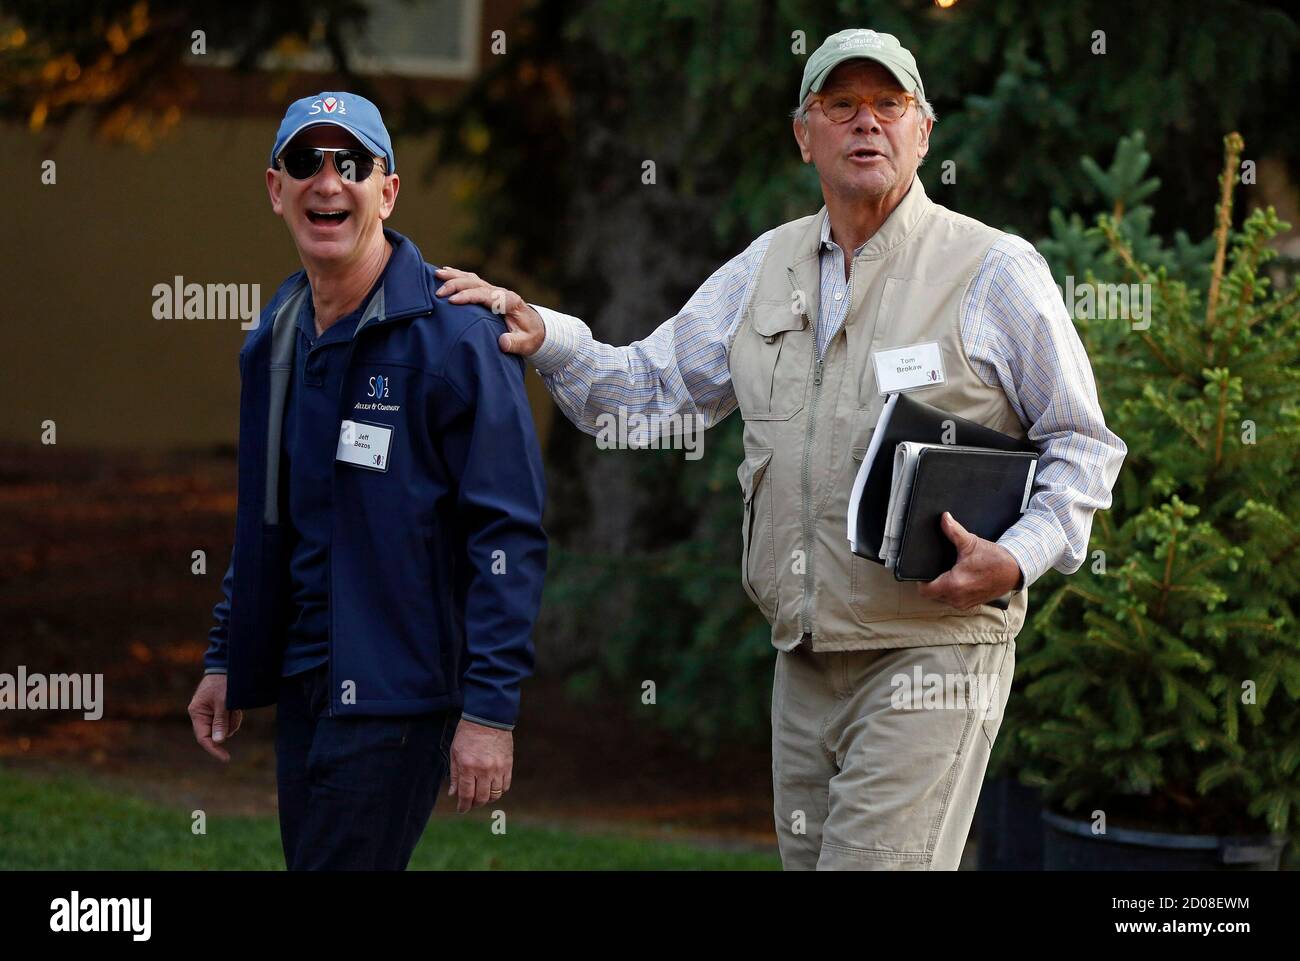 Amazon.com Chief Jeff Bezos (L) and former television news anchor Tom  Brokaw attend the Allen & Co Media Conference in Sun Valley, Idaho July 12,  2012. REUTERS/Jim Urquhart (UNITED STATES - Tags: